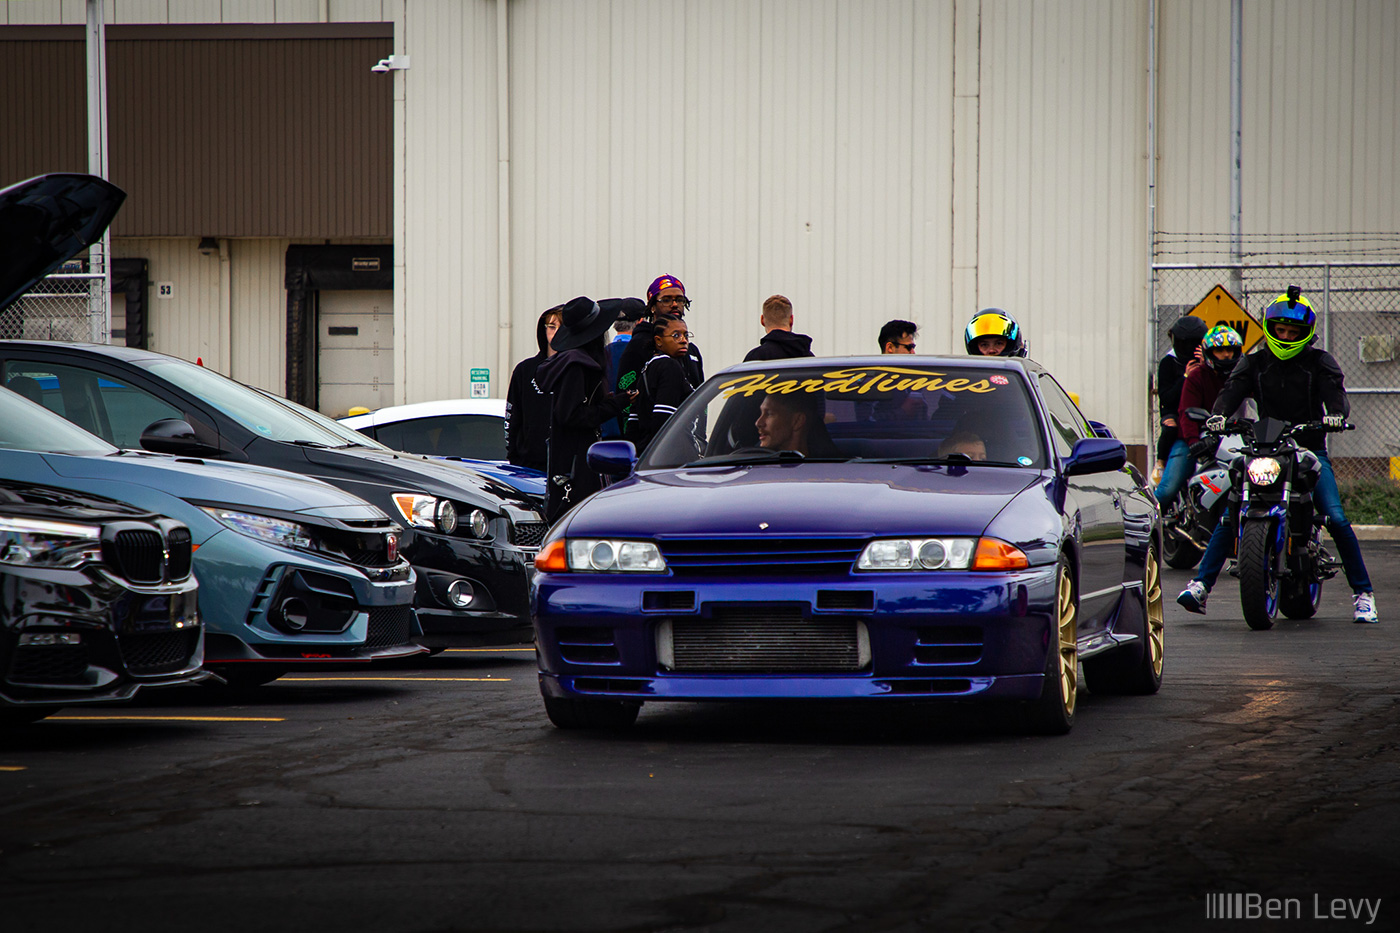 Blue Nissan Skyline GT-R with Hard Times Racing